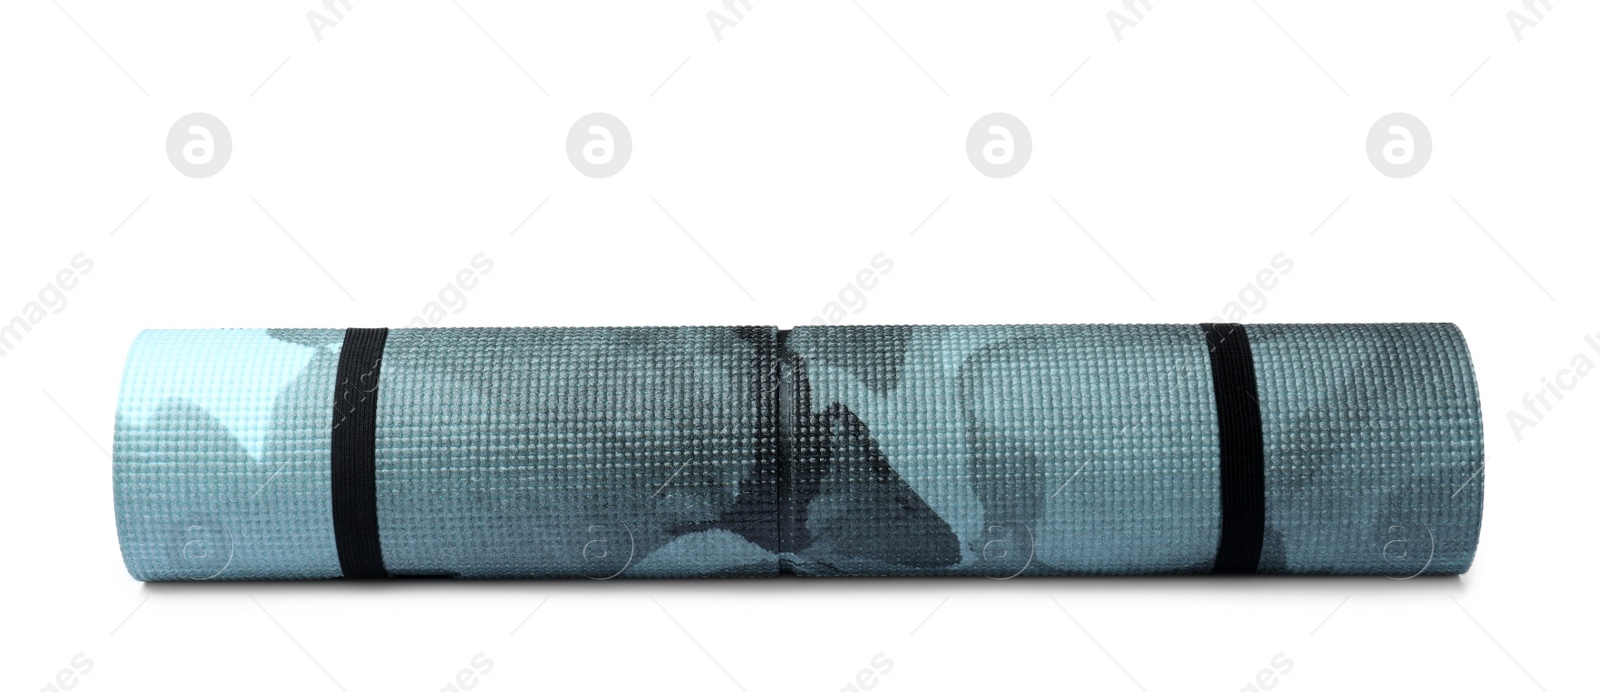 Photo of Rolled mat isolated on white. Camping tourism equipment